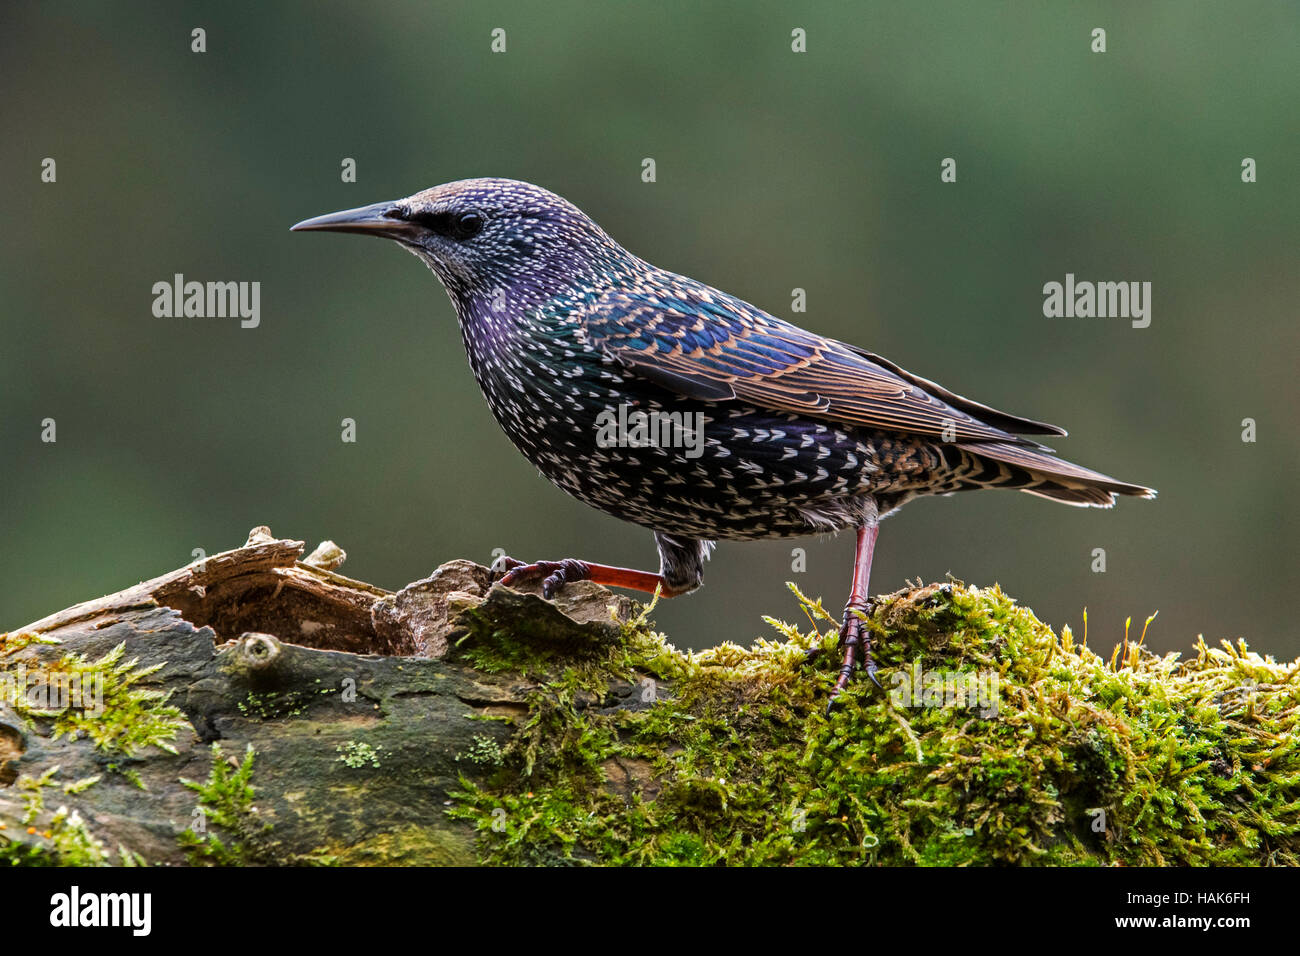 Common starling / European starling (Sturnus vulgaris) perched on moss covered branch Stock Photo